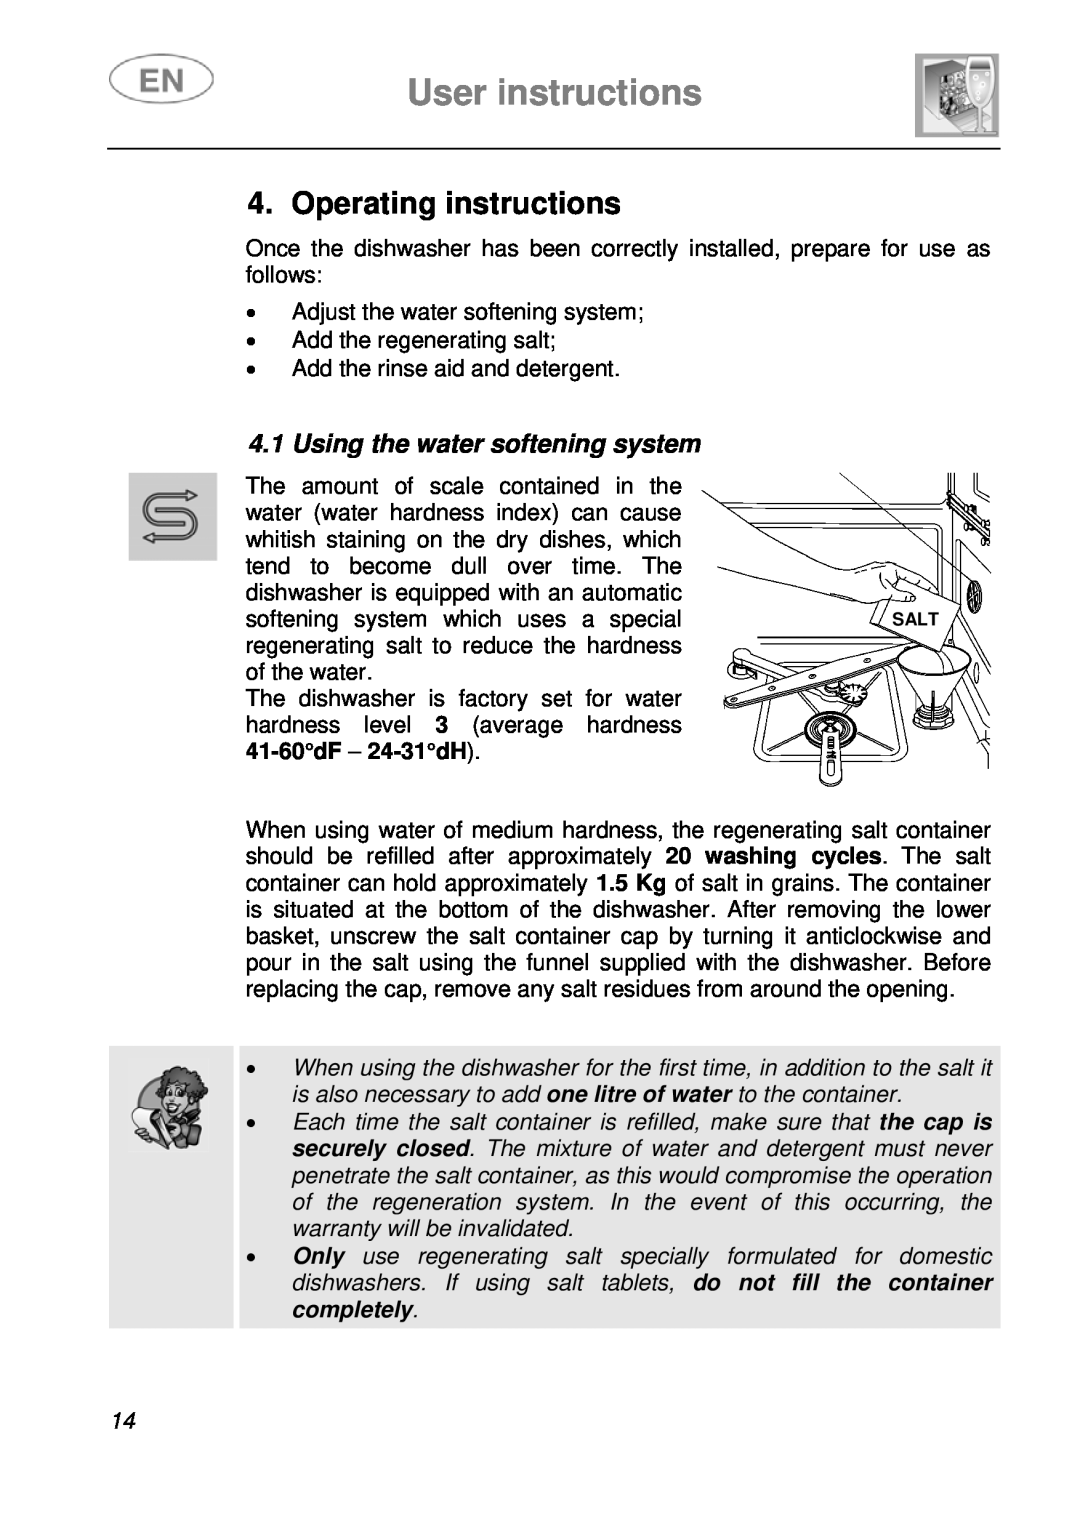 CDA WC460 manual Operating instructions, User instructions, 4.1Using the water softening system 